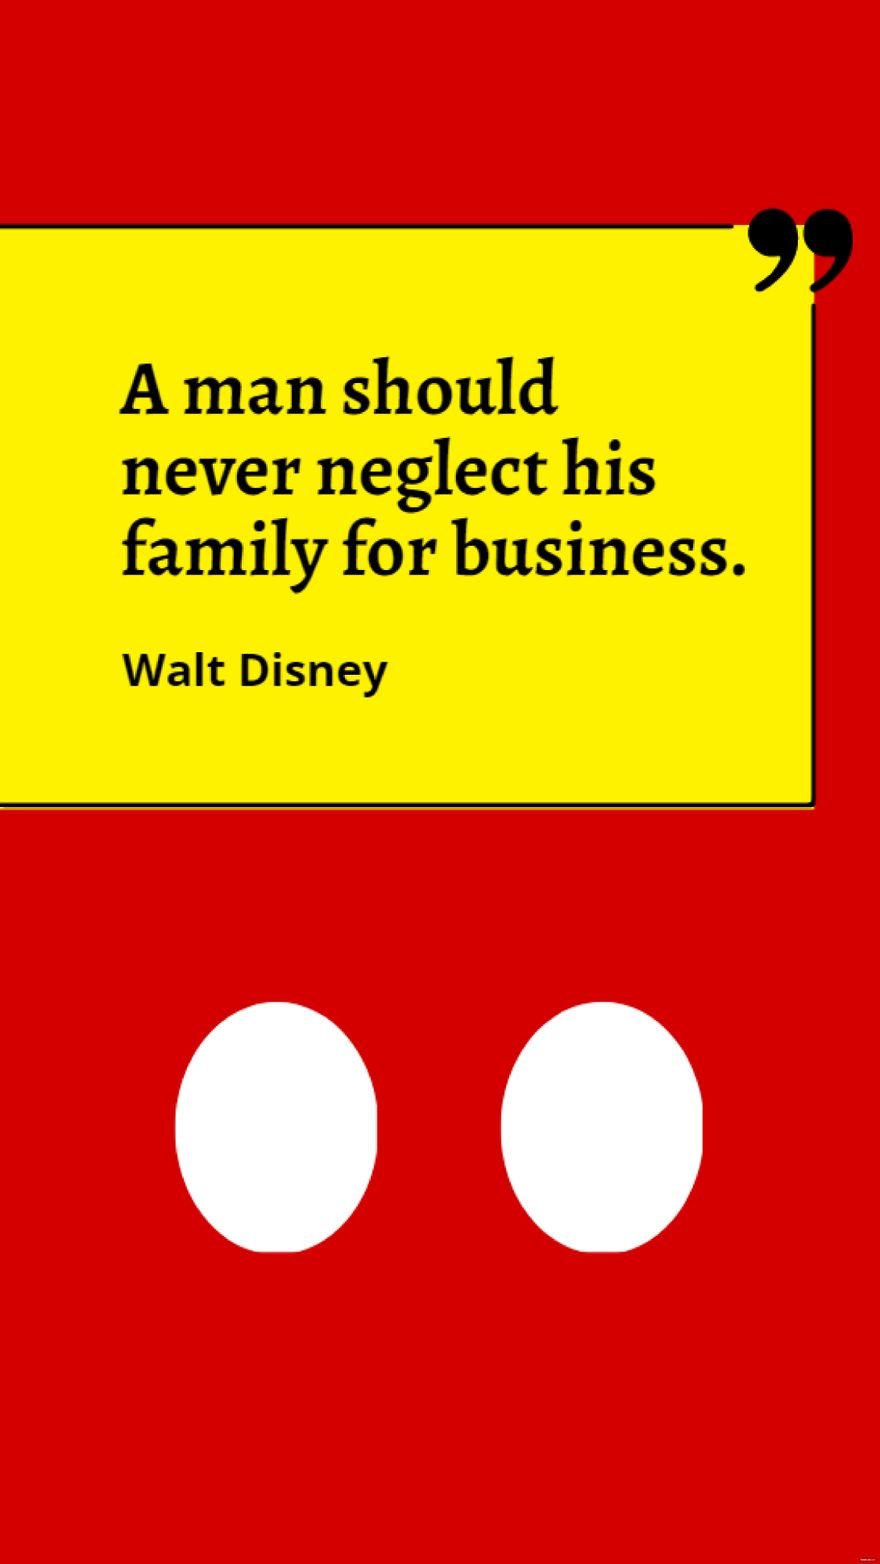 Walt Disney - A man should never neglect his family for business.